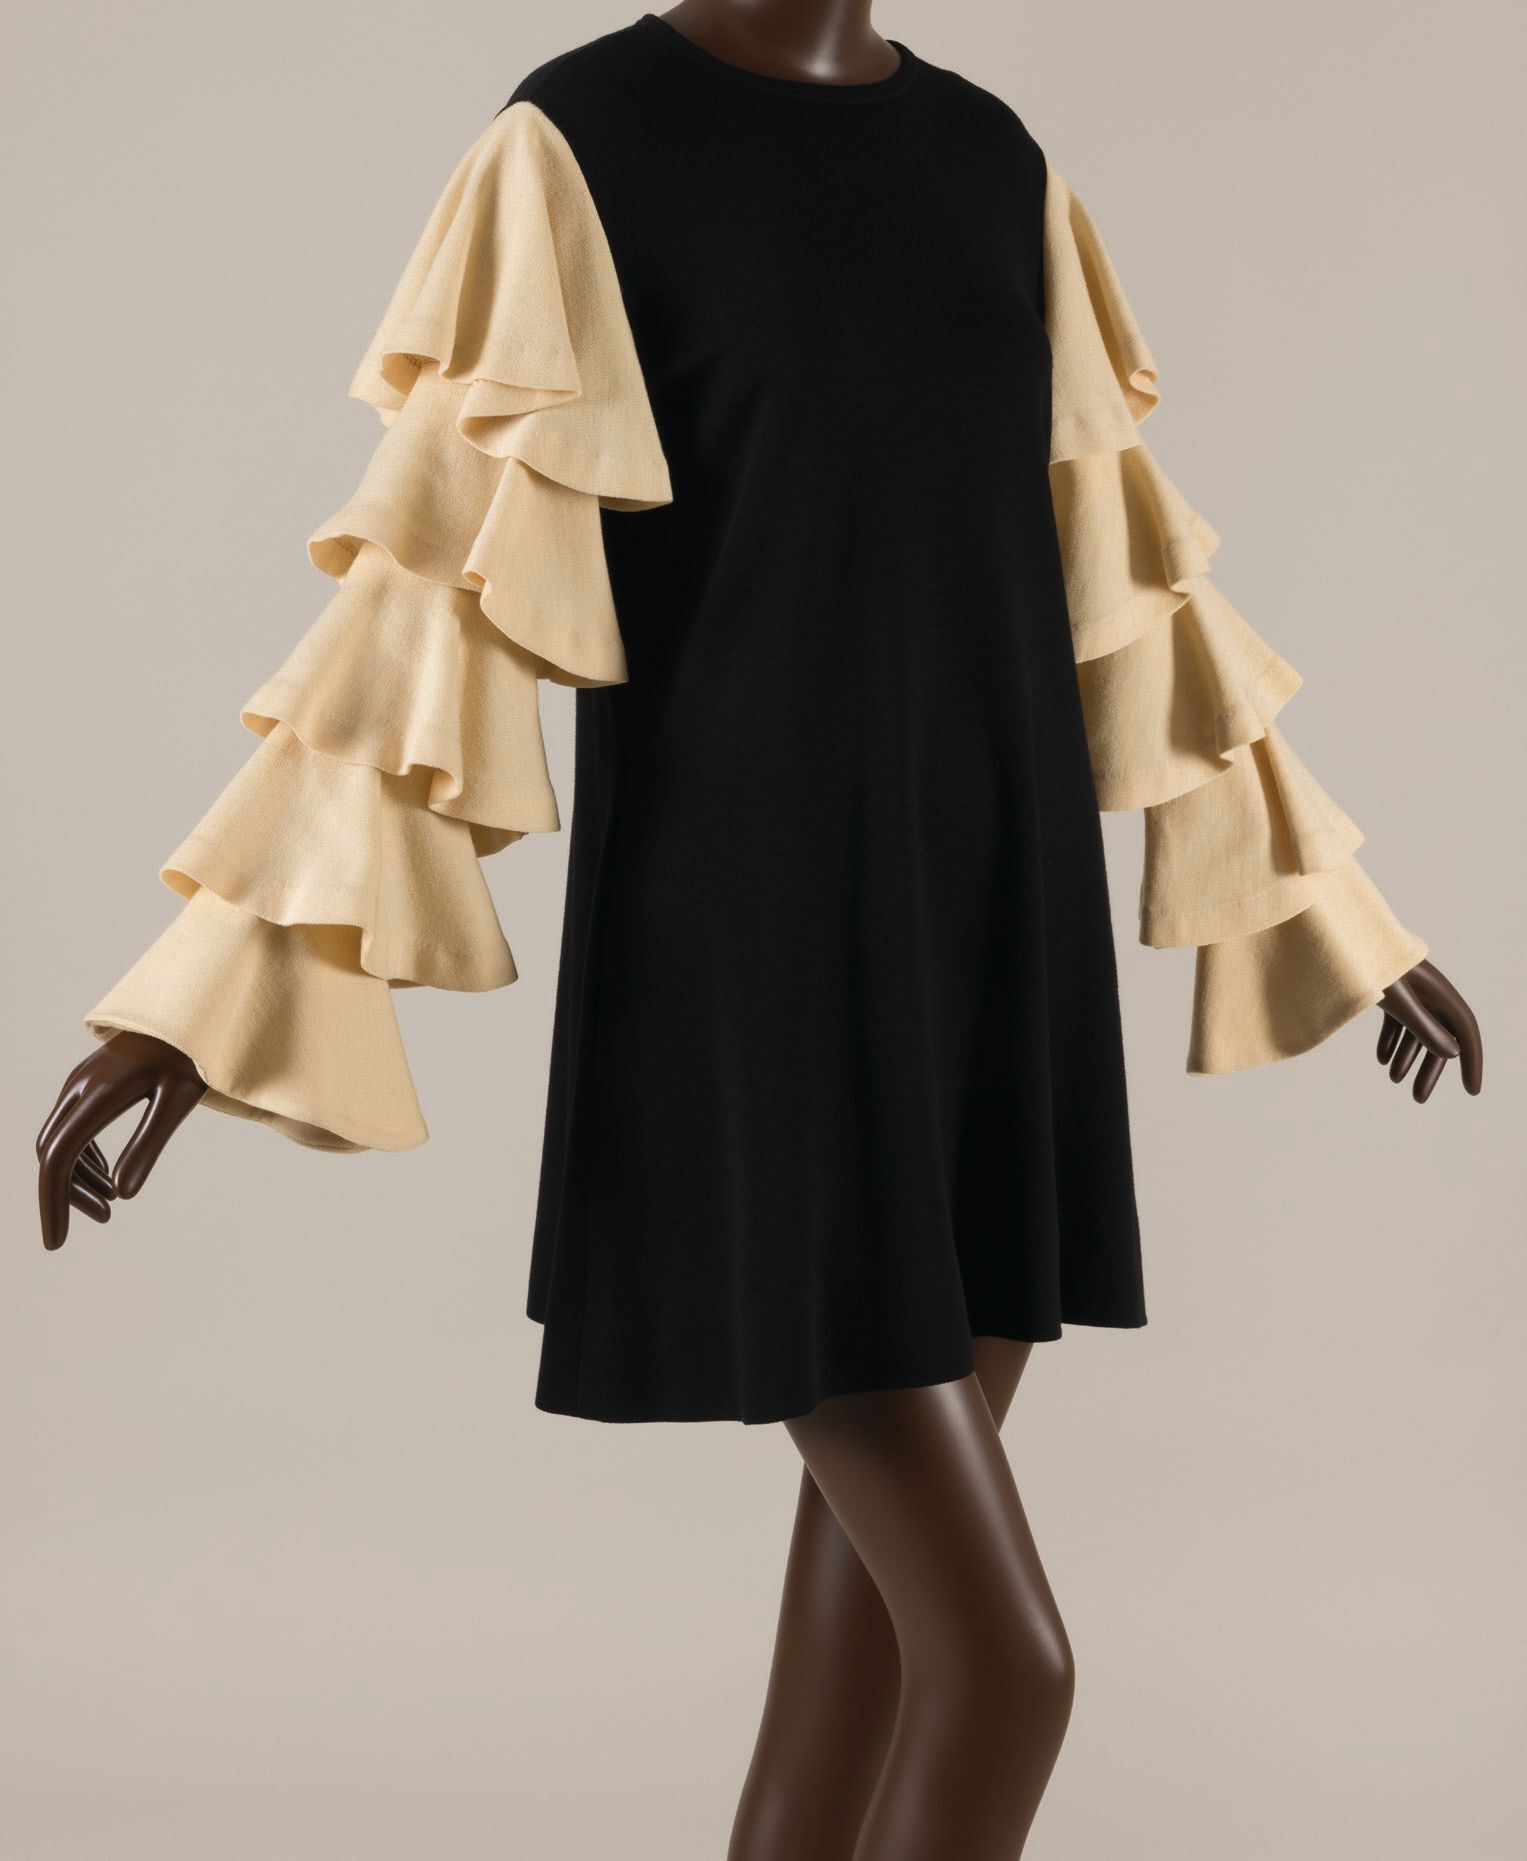 Rudi Gernreich black and cream wool dress, circa 1967 PHOTO: GIFT OF RUTH FORD/© THE MUSEUM AT FIT